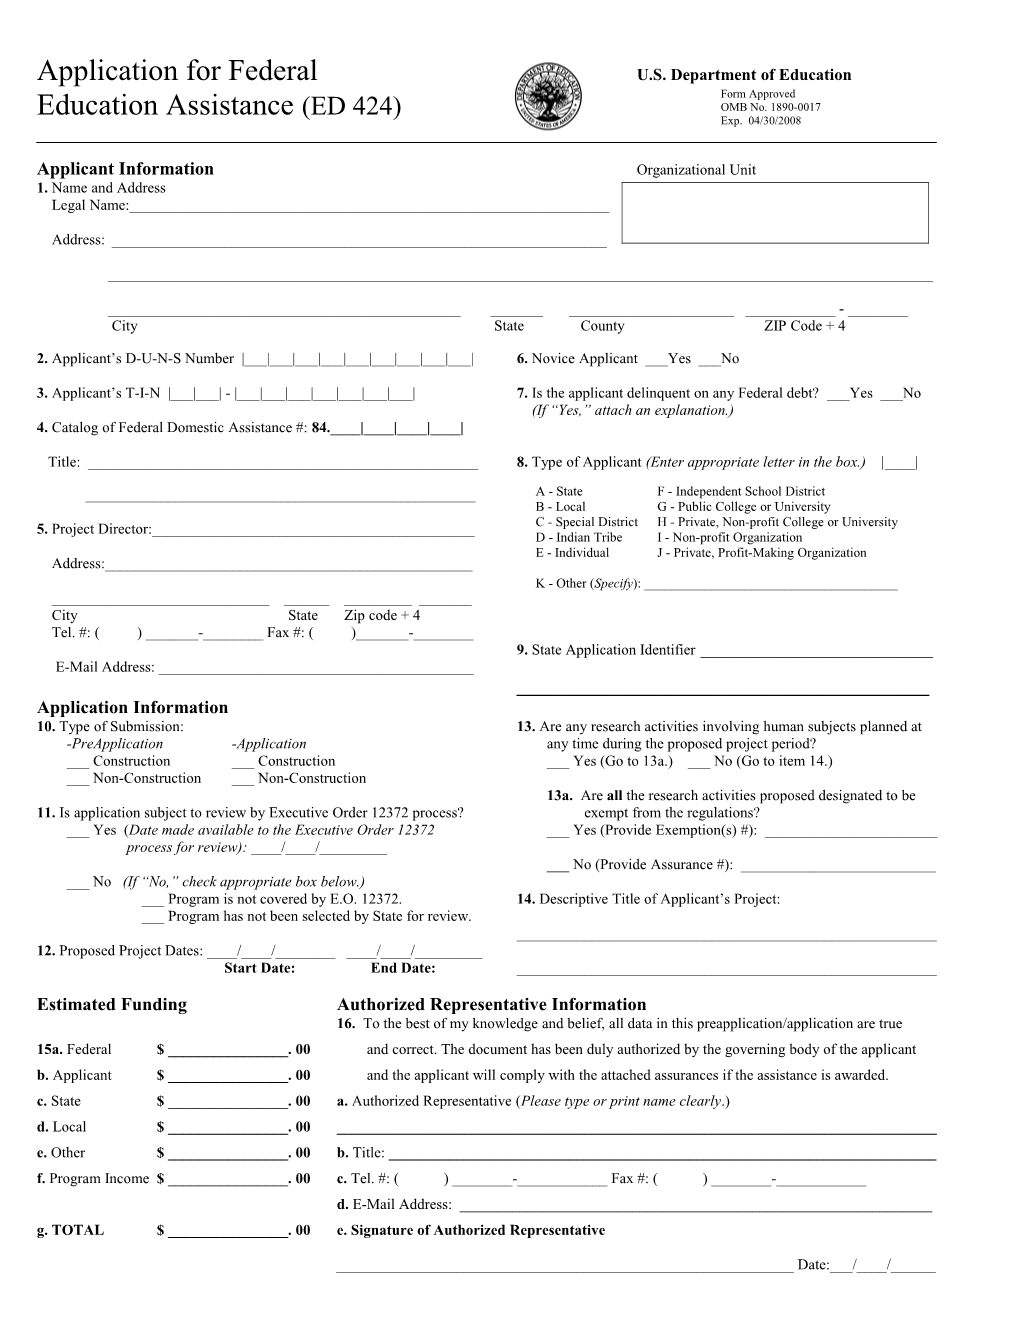 ED Form 424 Application for Federal Education Assistance (MS Word)